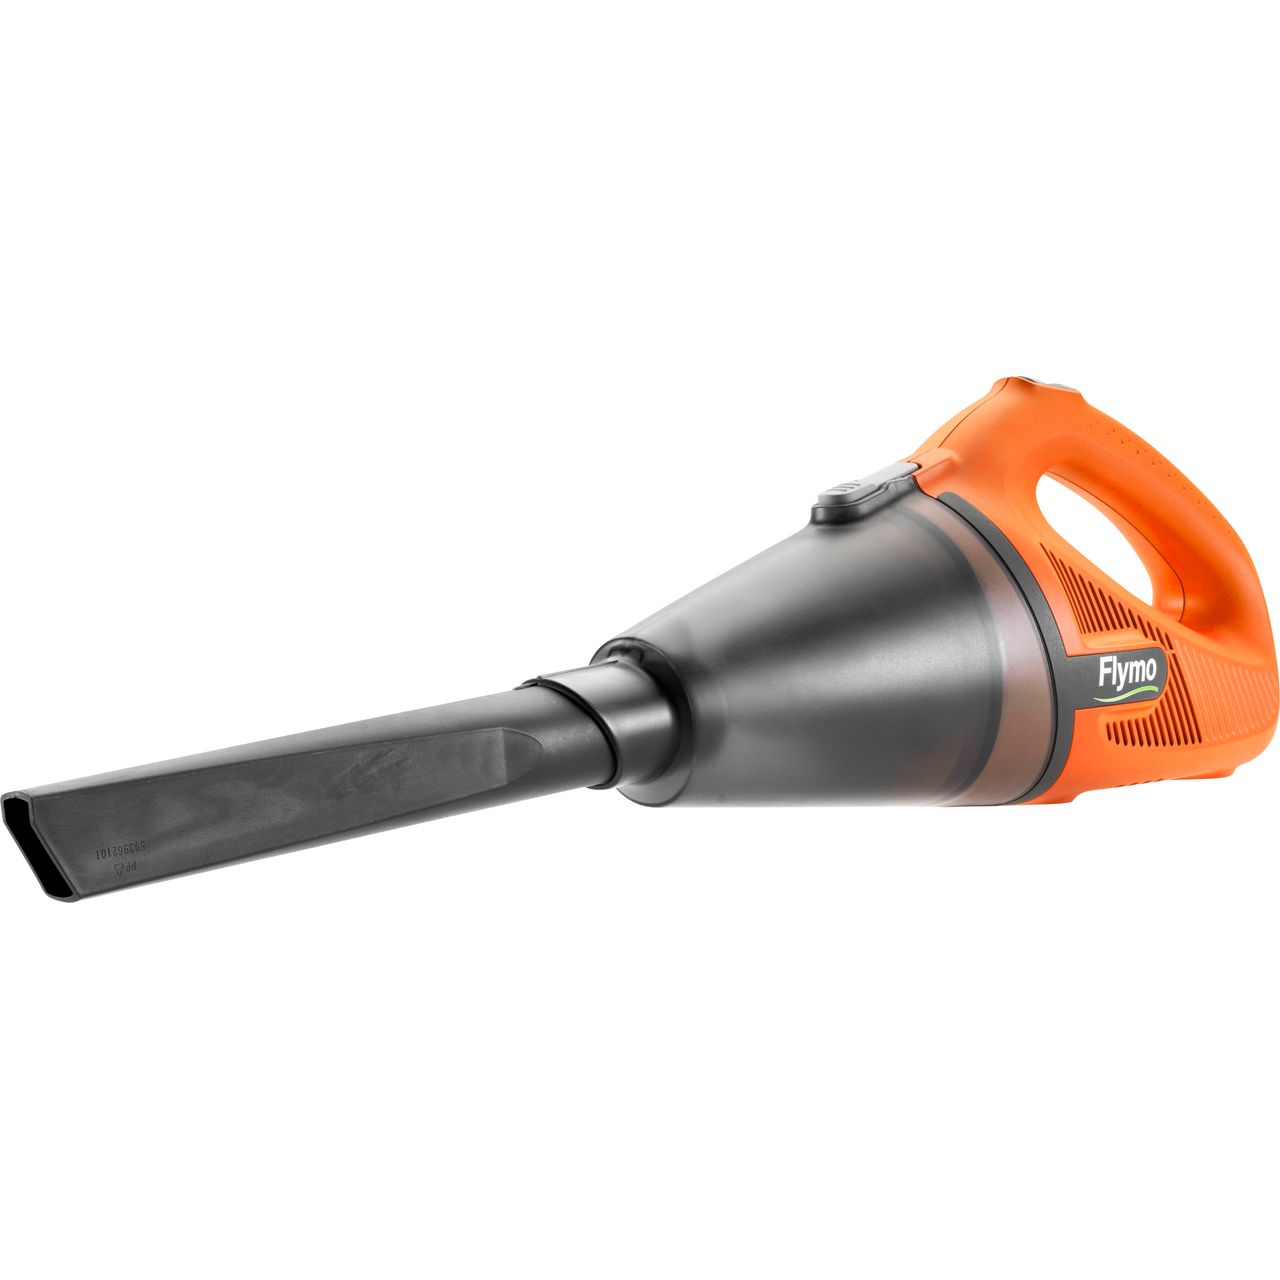 Flymo SimpliVac Electric 18 Volts Leaf Vacuum Review